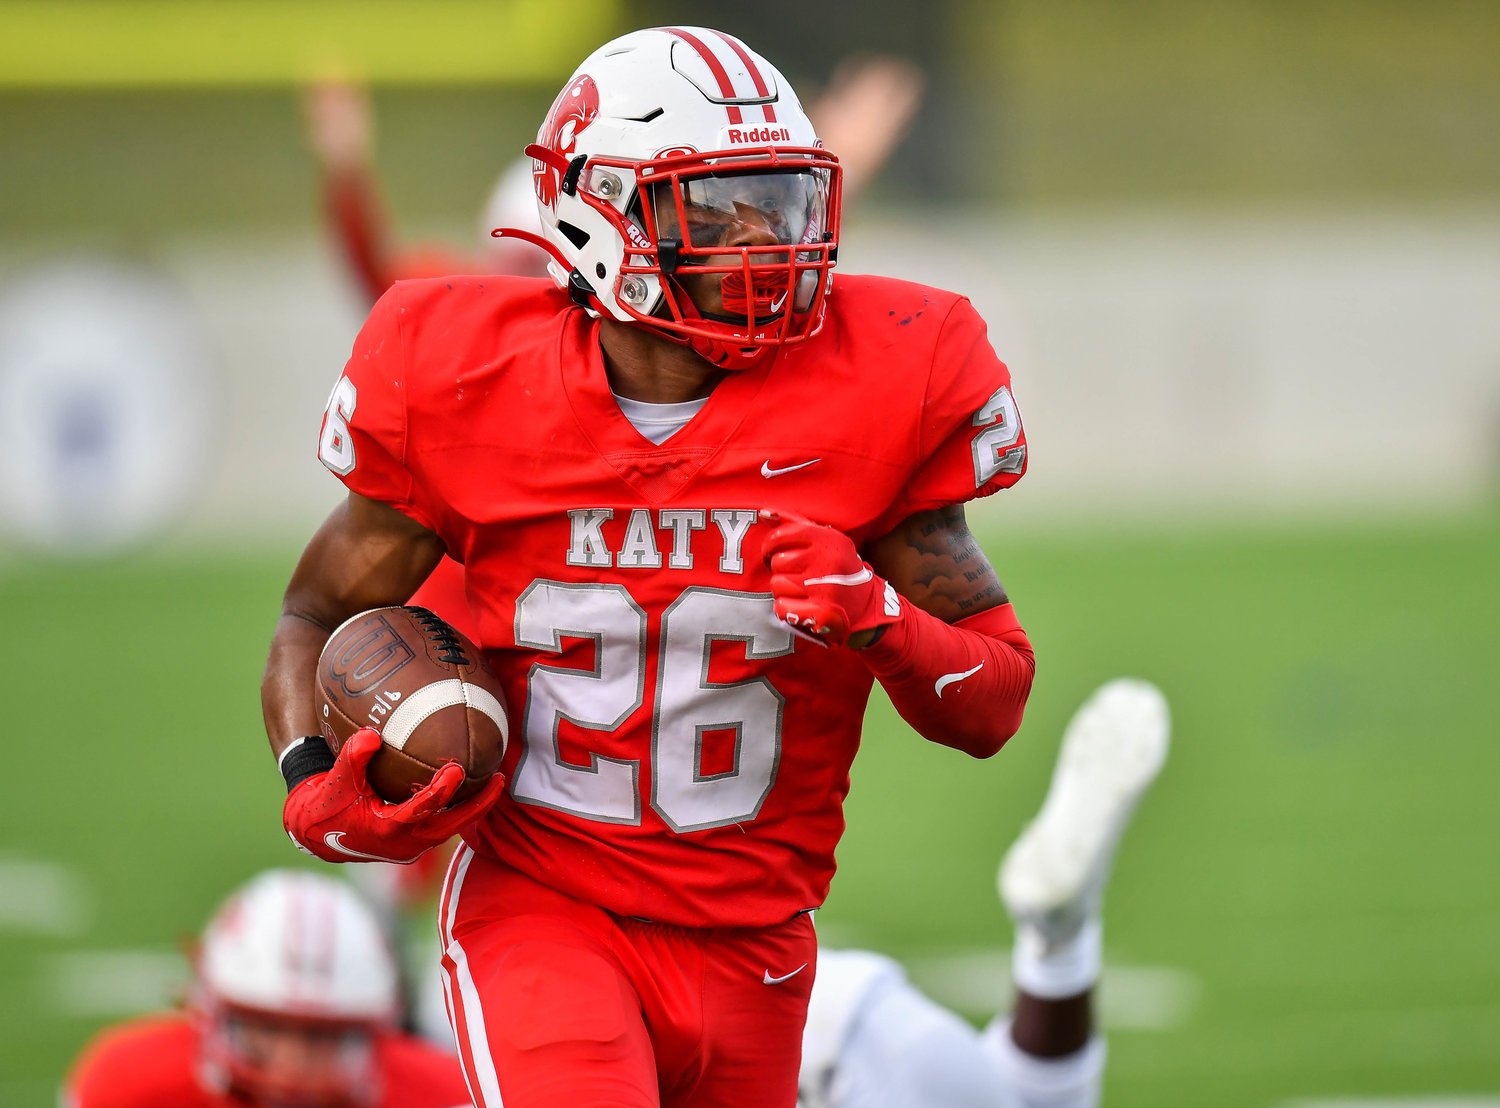 Katy, Tx. Oct. 1, 2021: Katy's #26 Isaiah Smith carries the ball scoring a TD during a game between Katy Tigers and Tompkins Falcons at Legacy Stadium in Katy. (Photo by Mark Goodman / Katy Times)